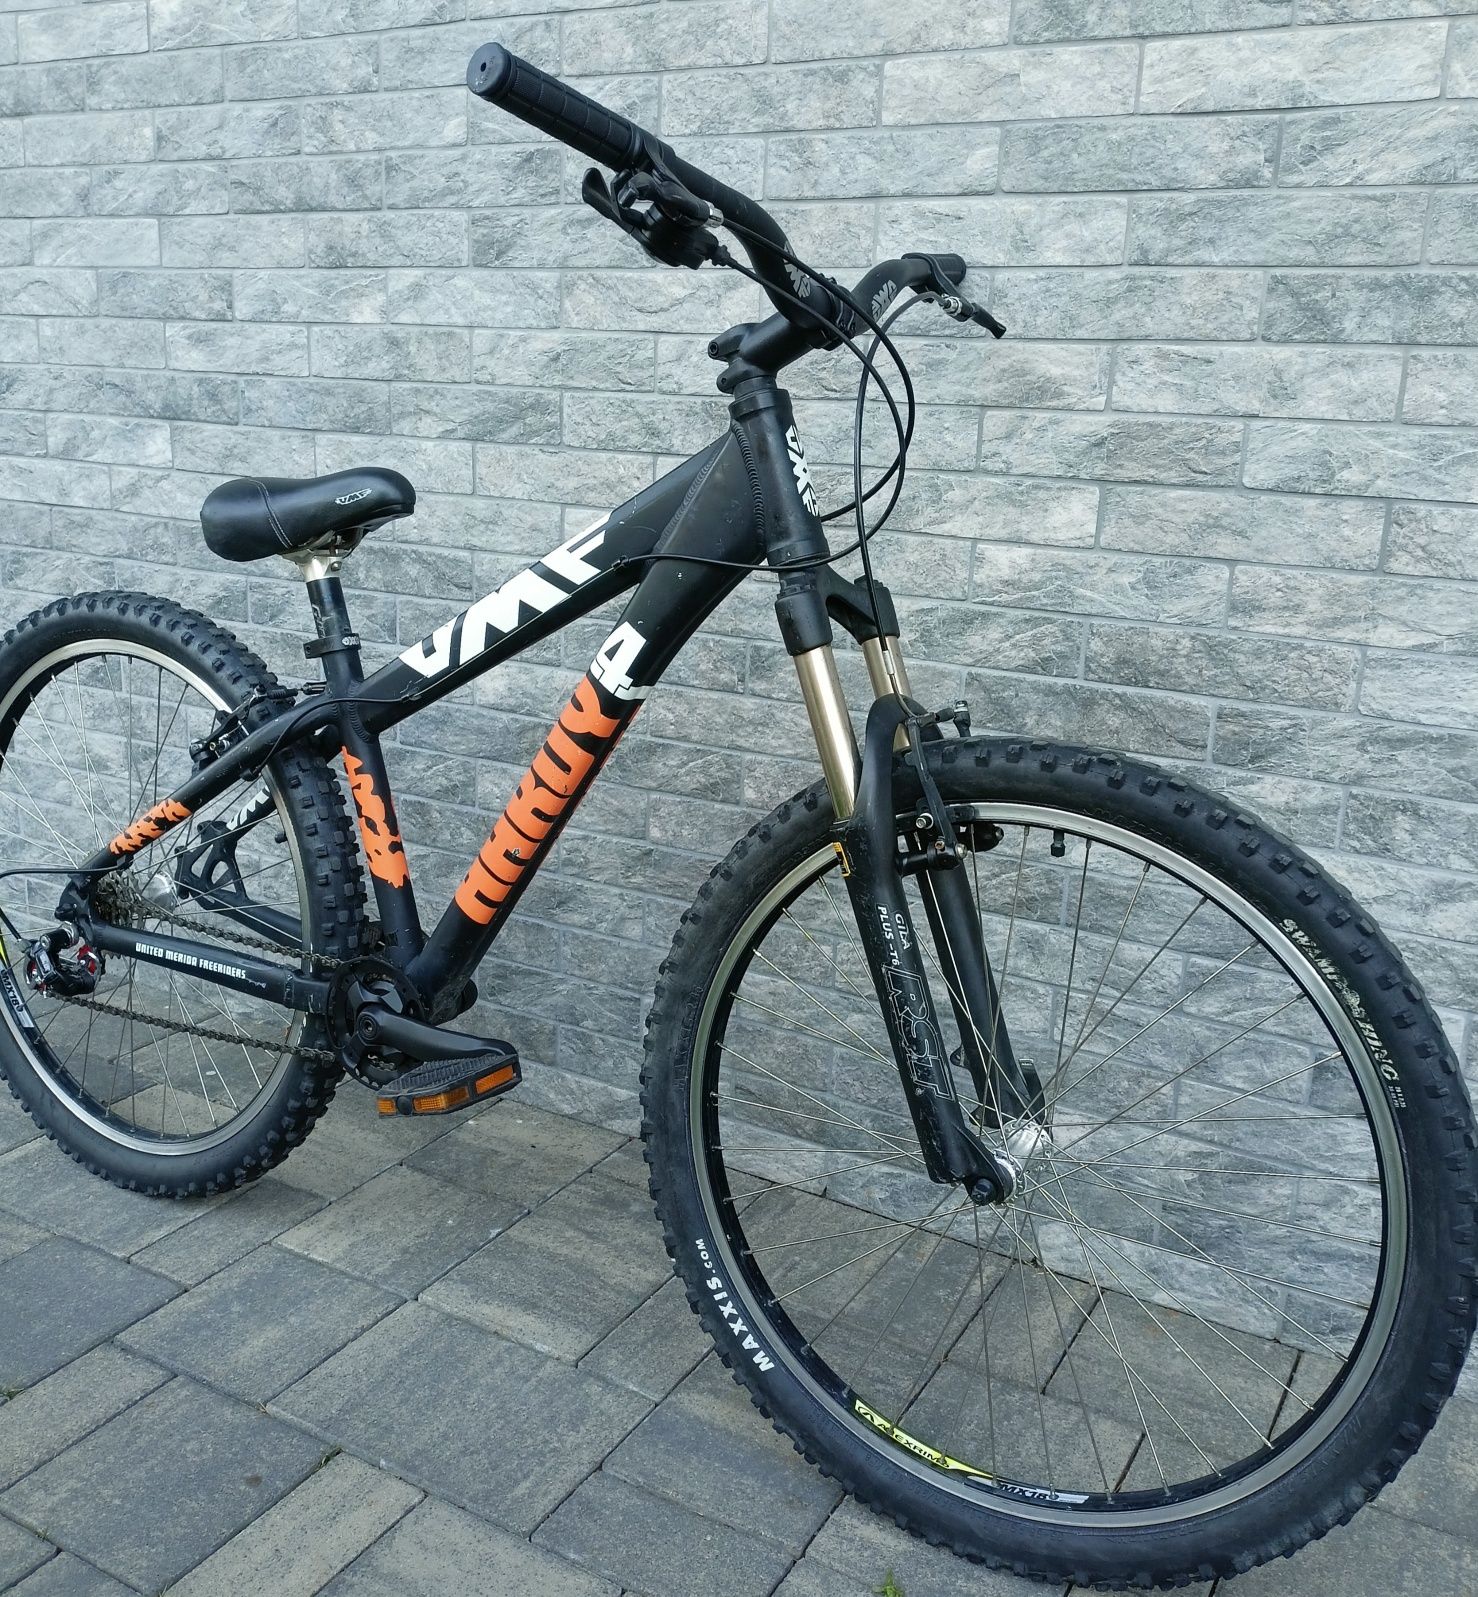 UMF hardy 4, trial, dirt Freestyle, 26"